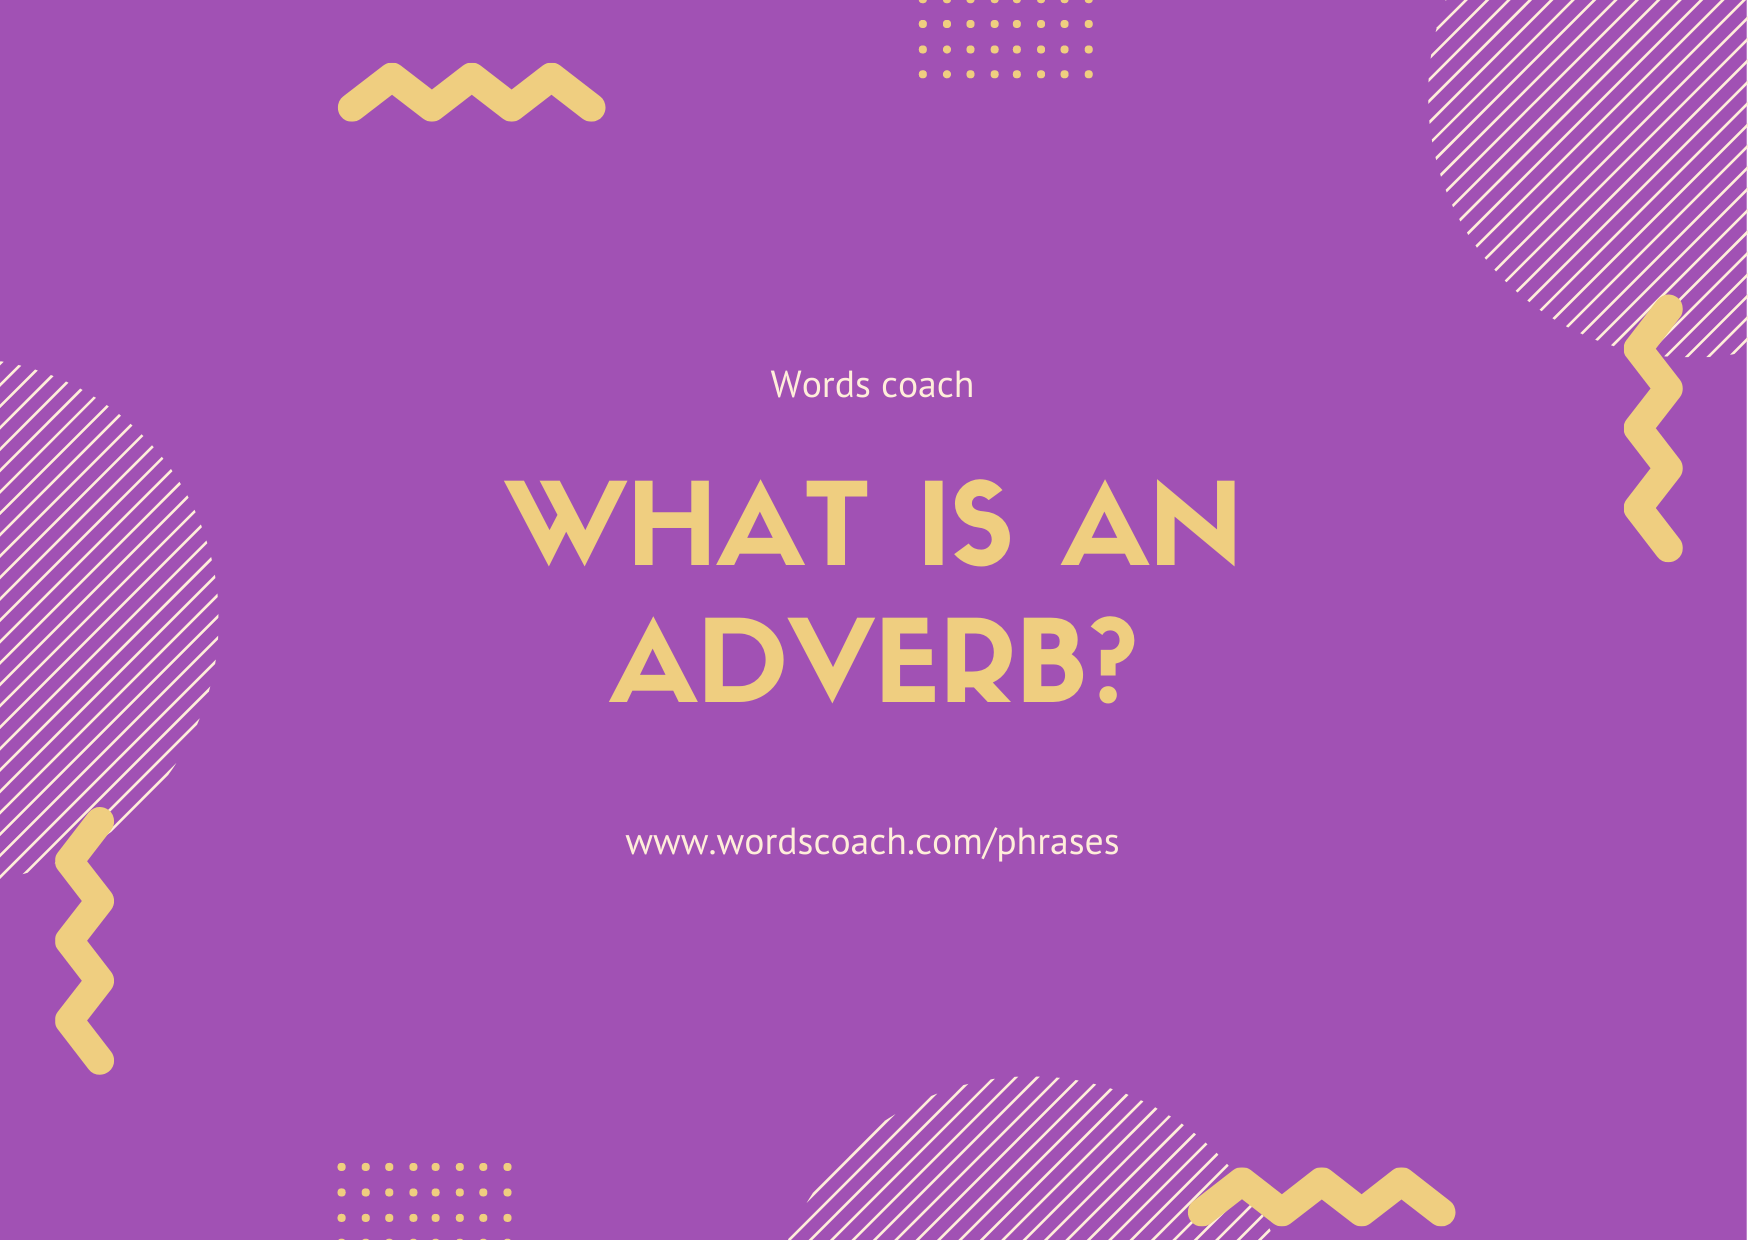 What Is an Adverb?